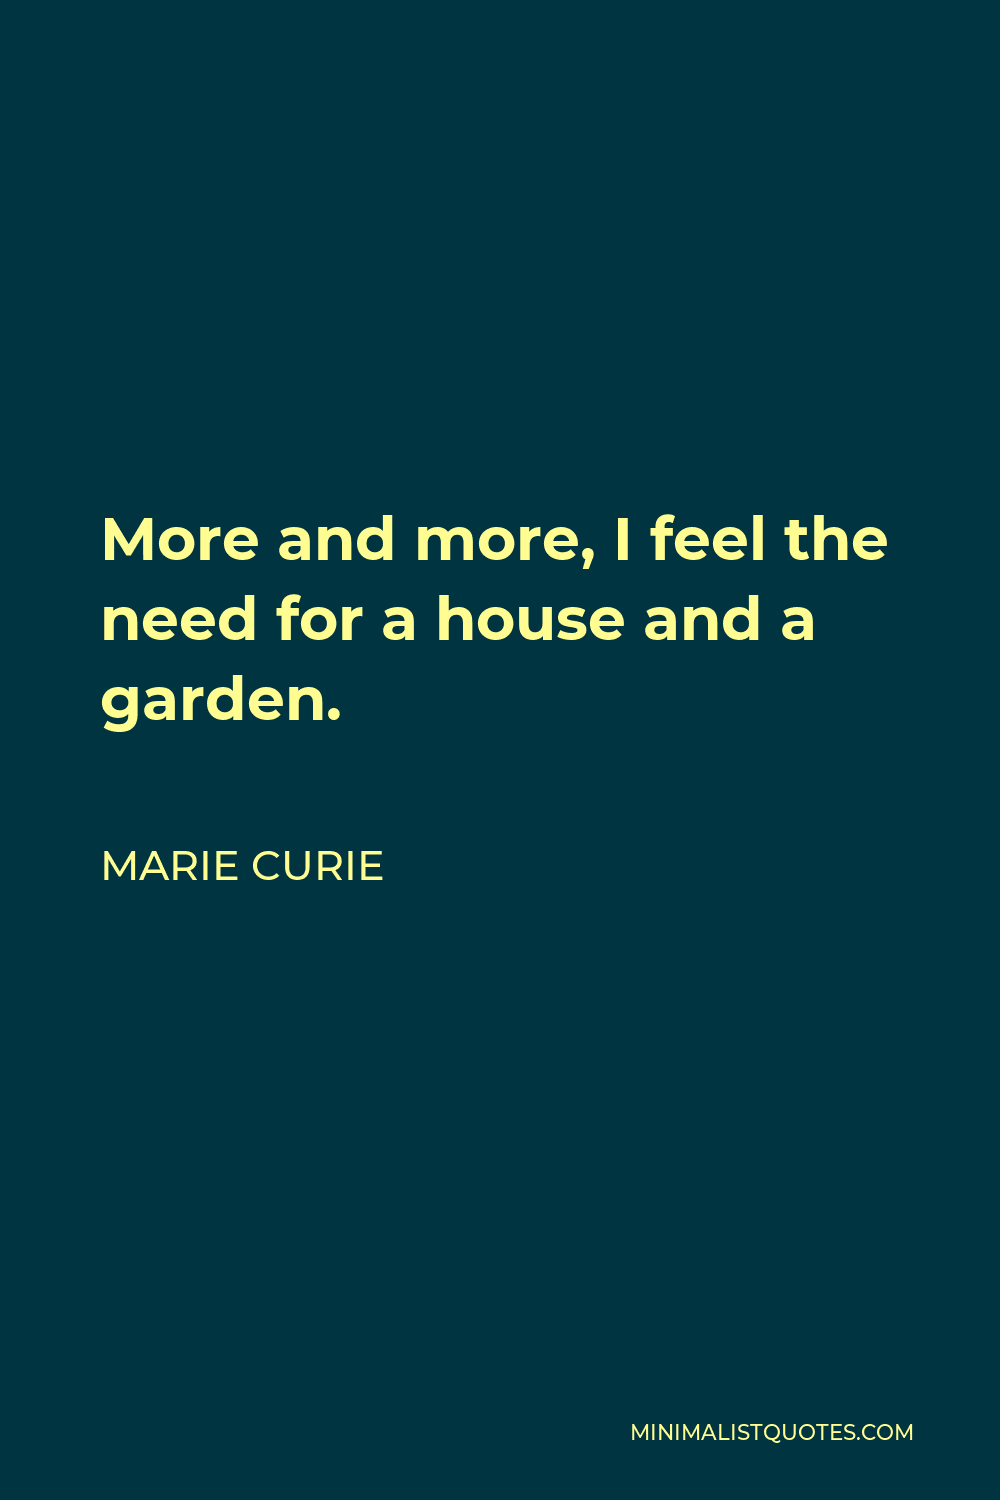 Marie Curie Quote - More and more, I feel the need for a house and a garden.